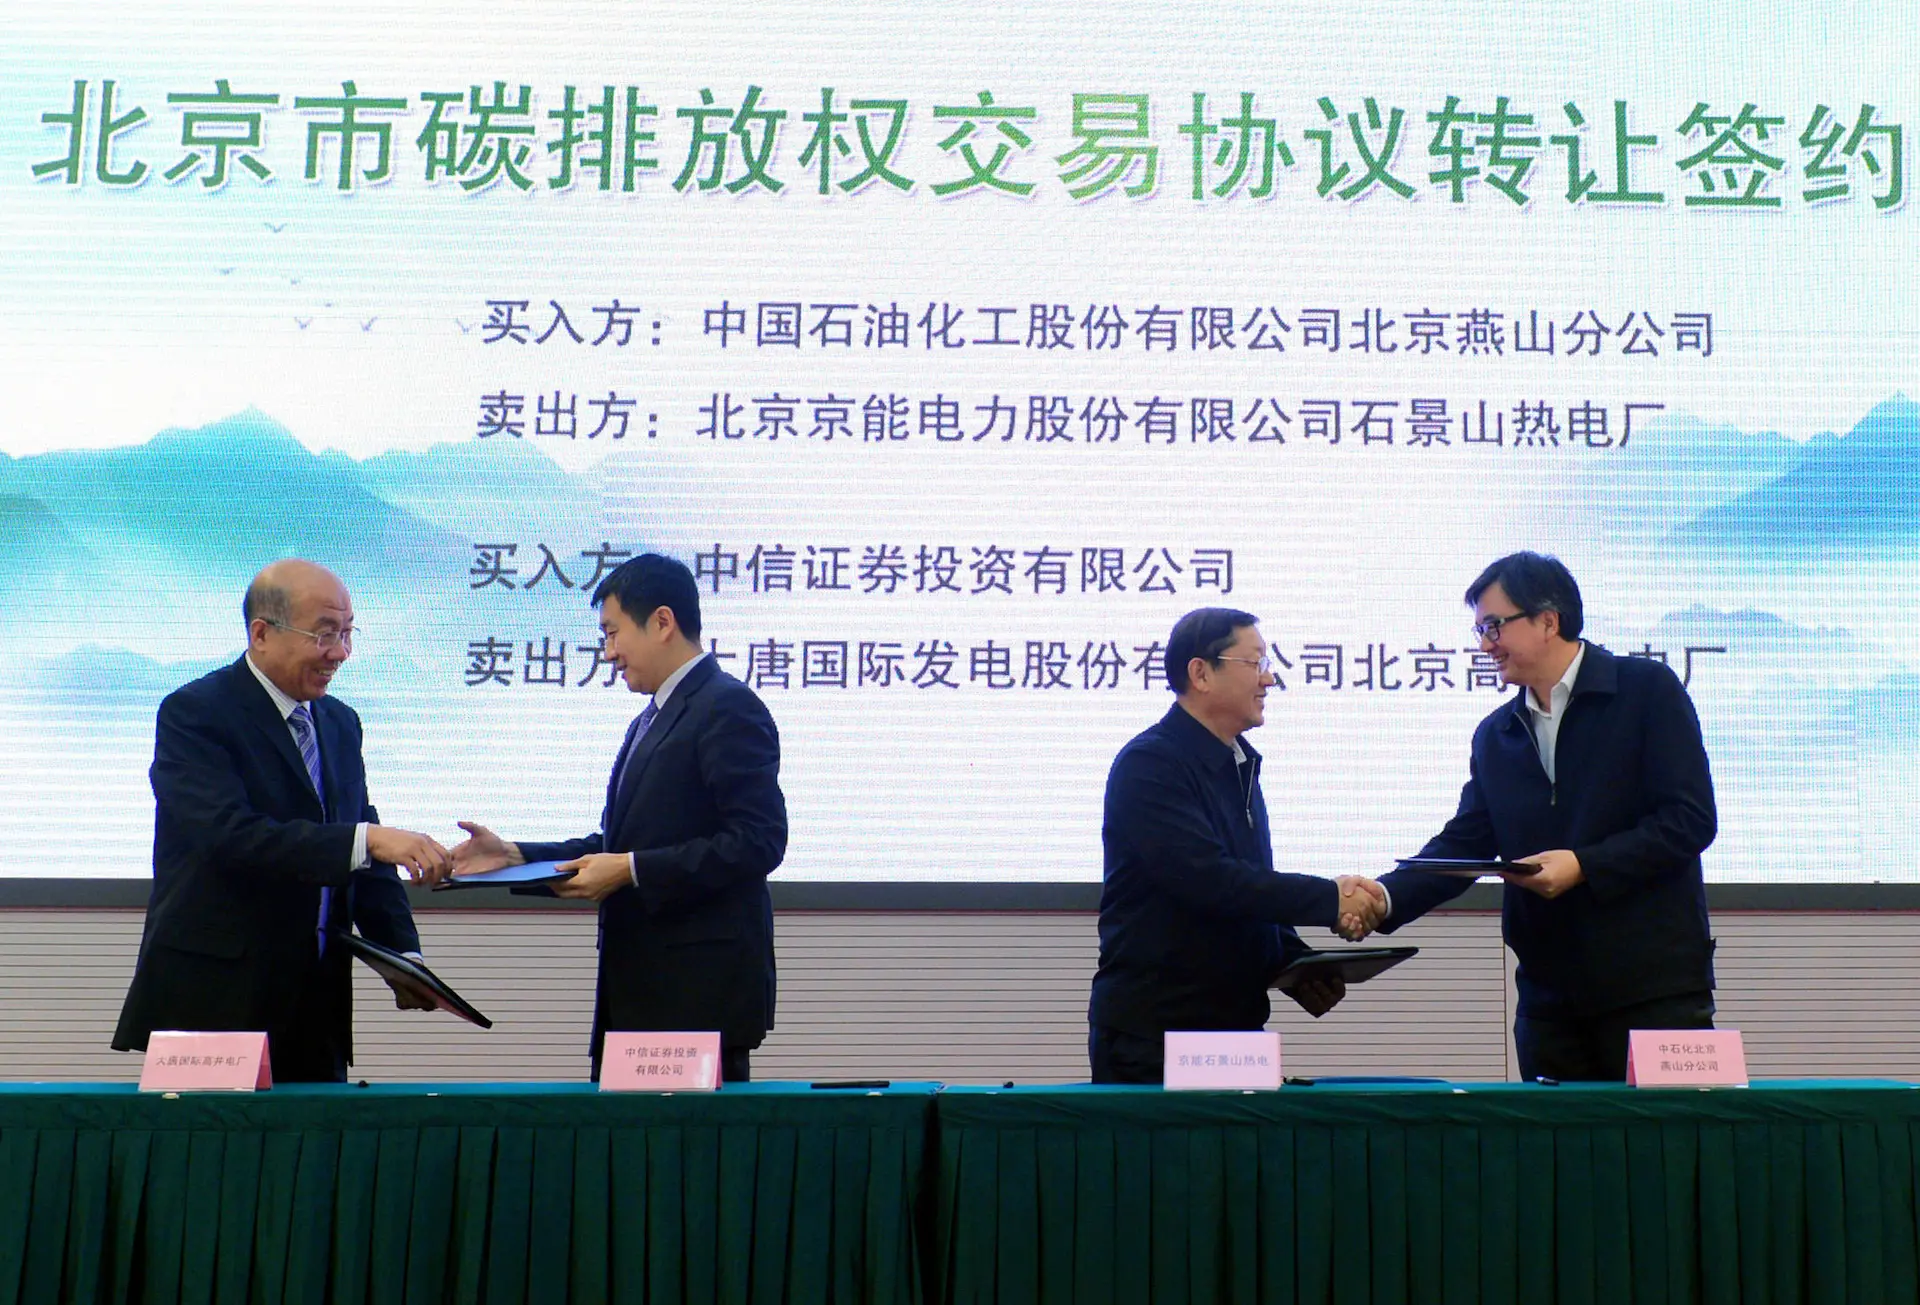 Signing ceremony for the carbon emission trading scheme in Beijing, 2013